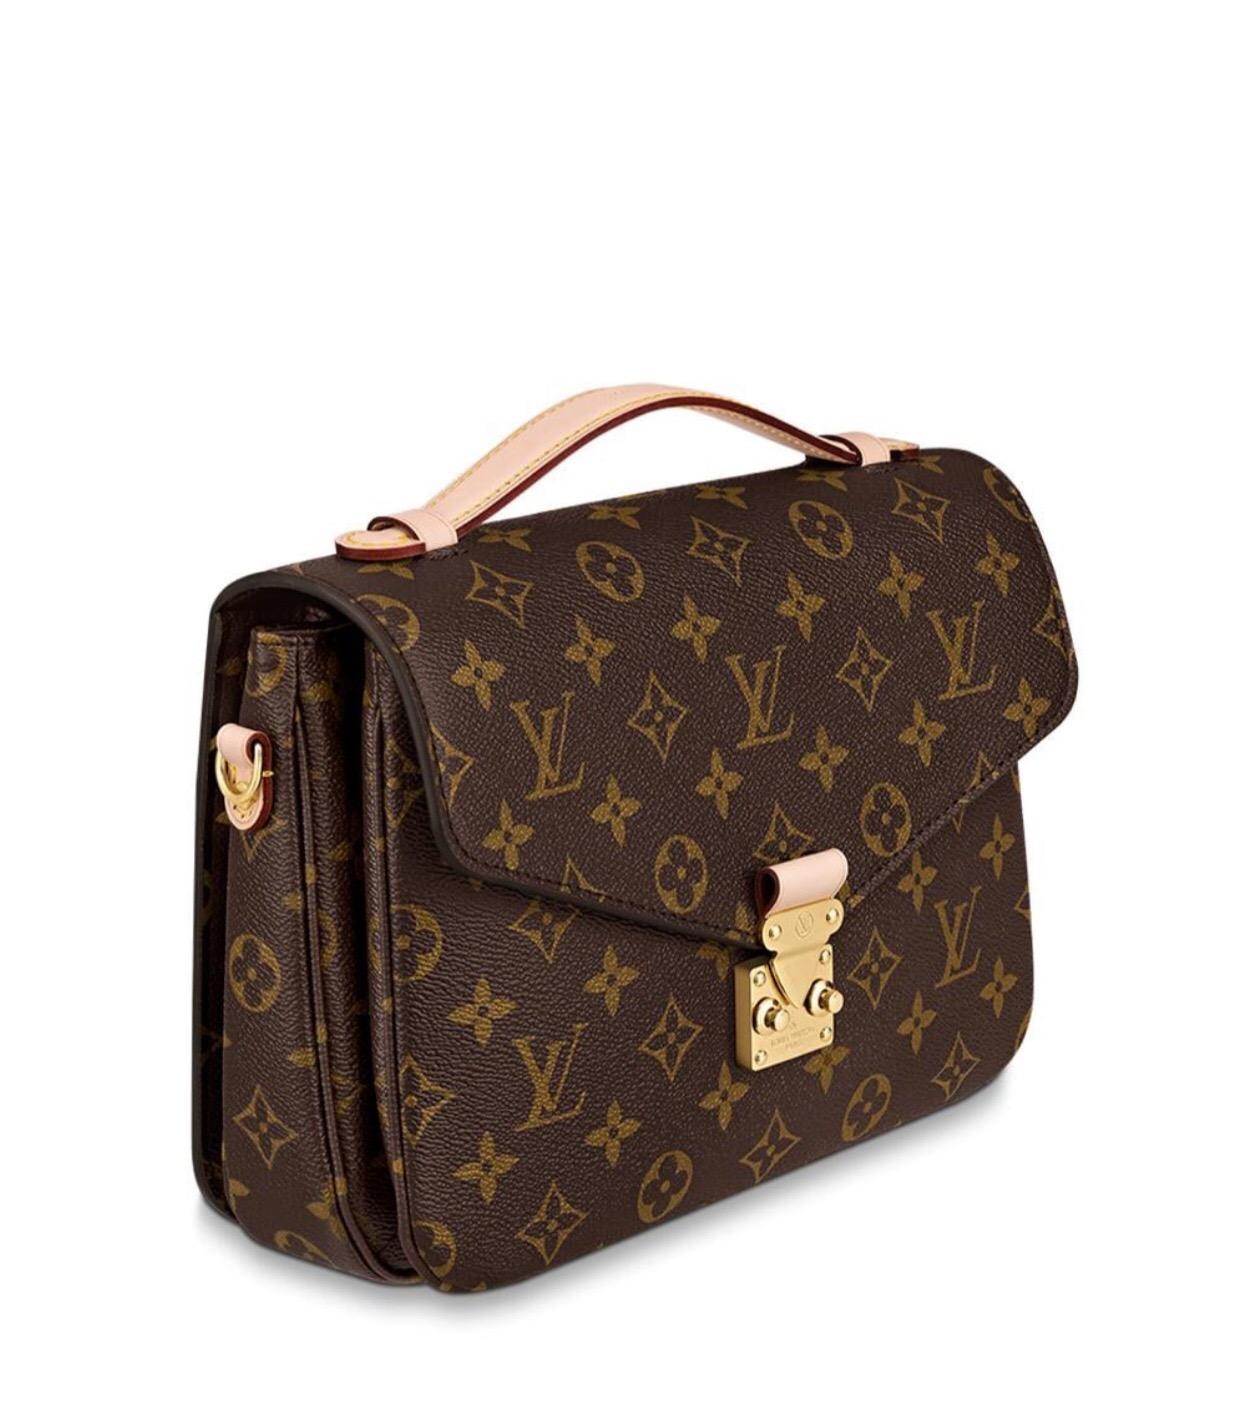 Brandnew Louis Vuitton Pochette METIS

This bag is fresh from the store and comes in brandnew, unused condition and dustbag.

Sold out for months and available with months-long waiting list - immediately available and ready to ship.

Elegance is